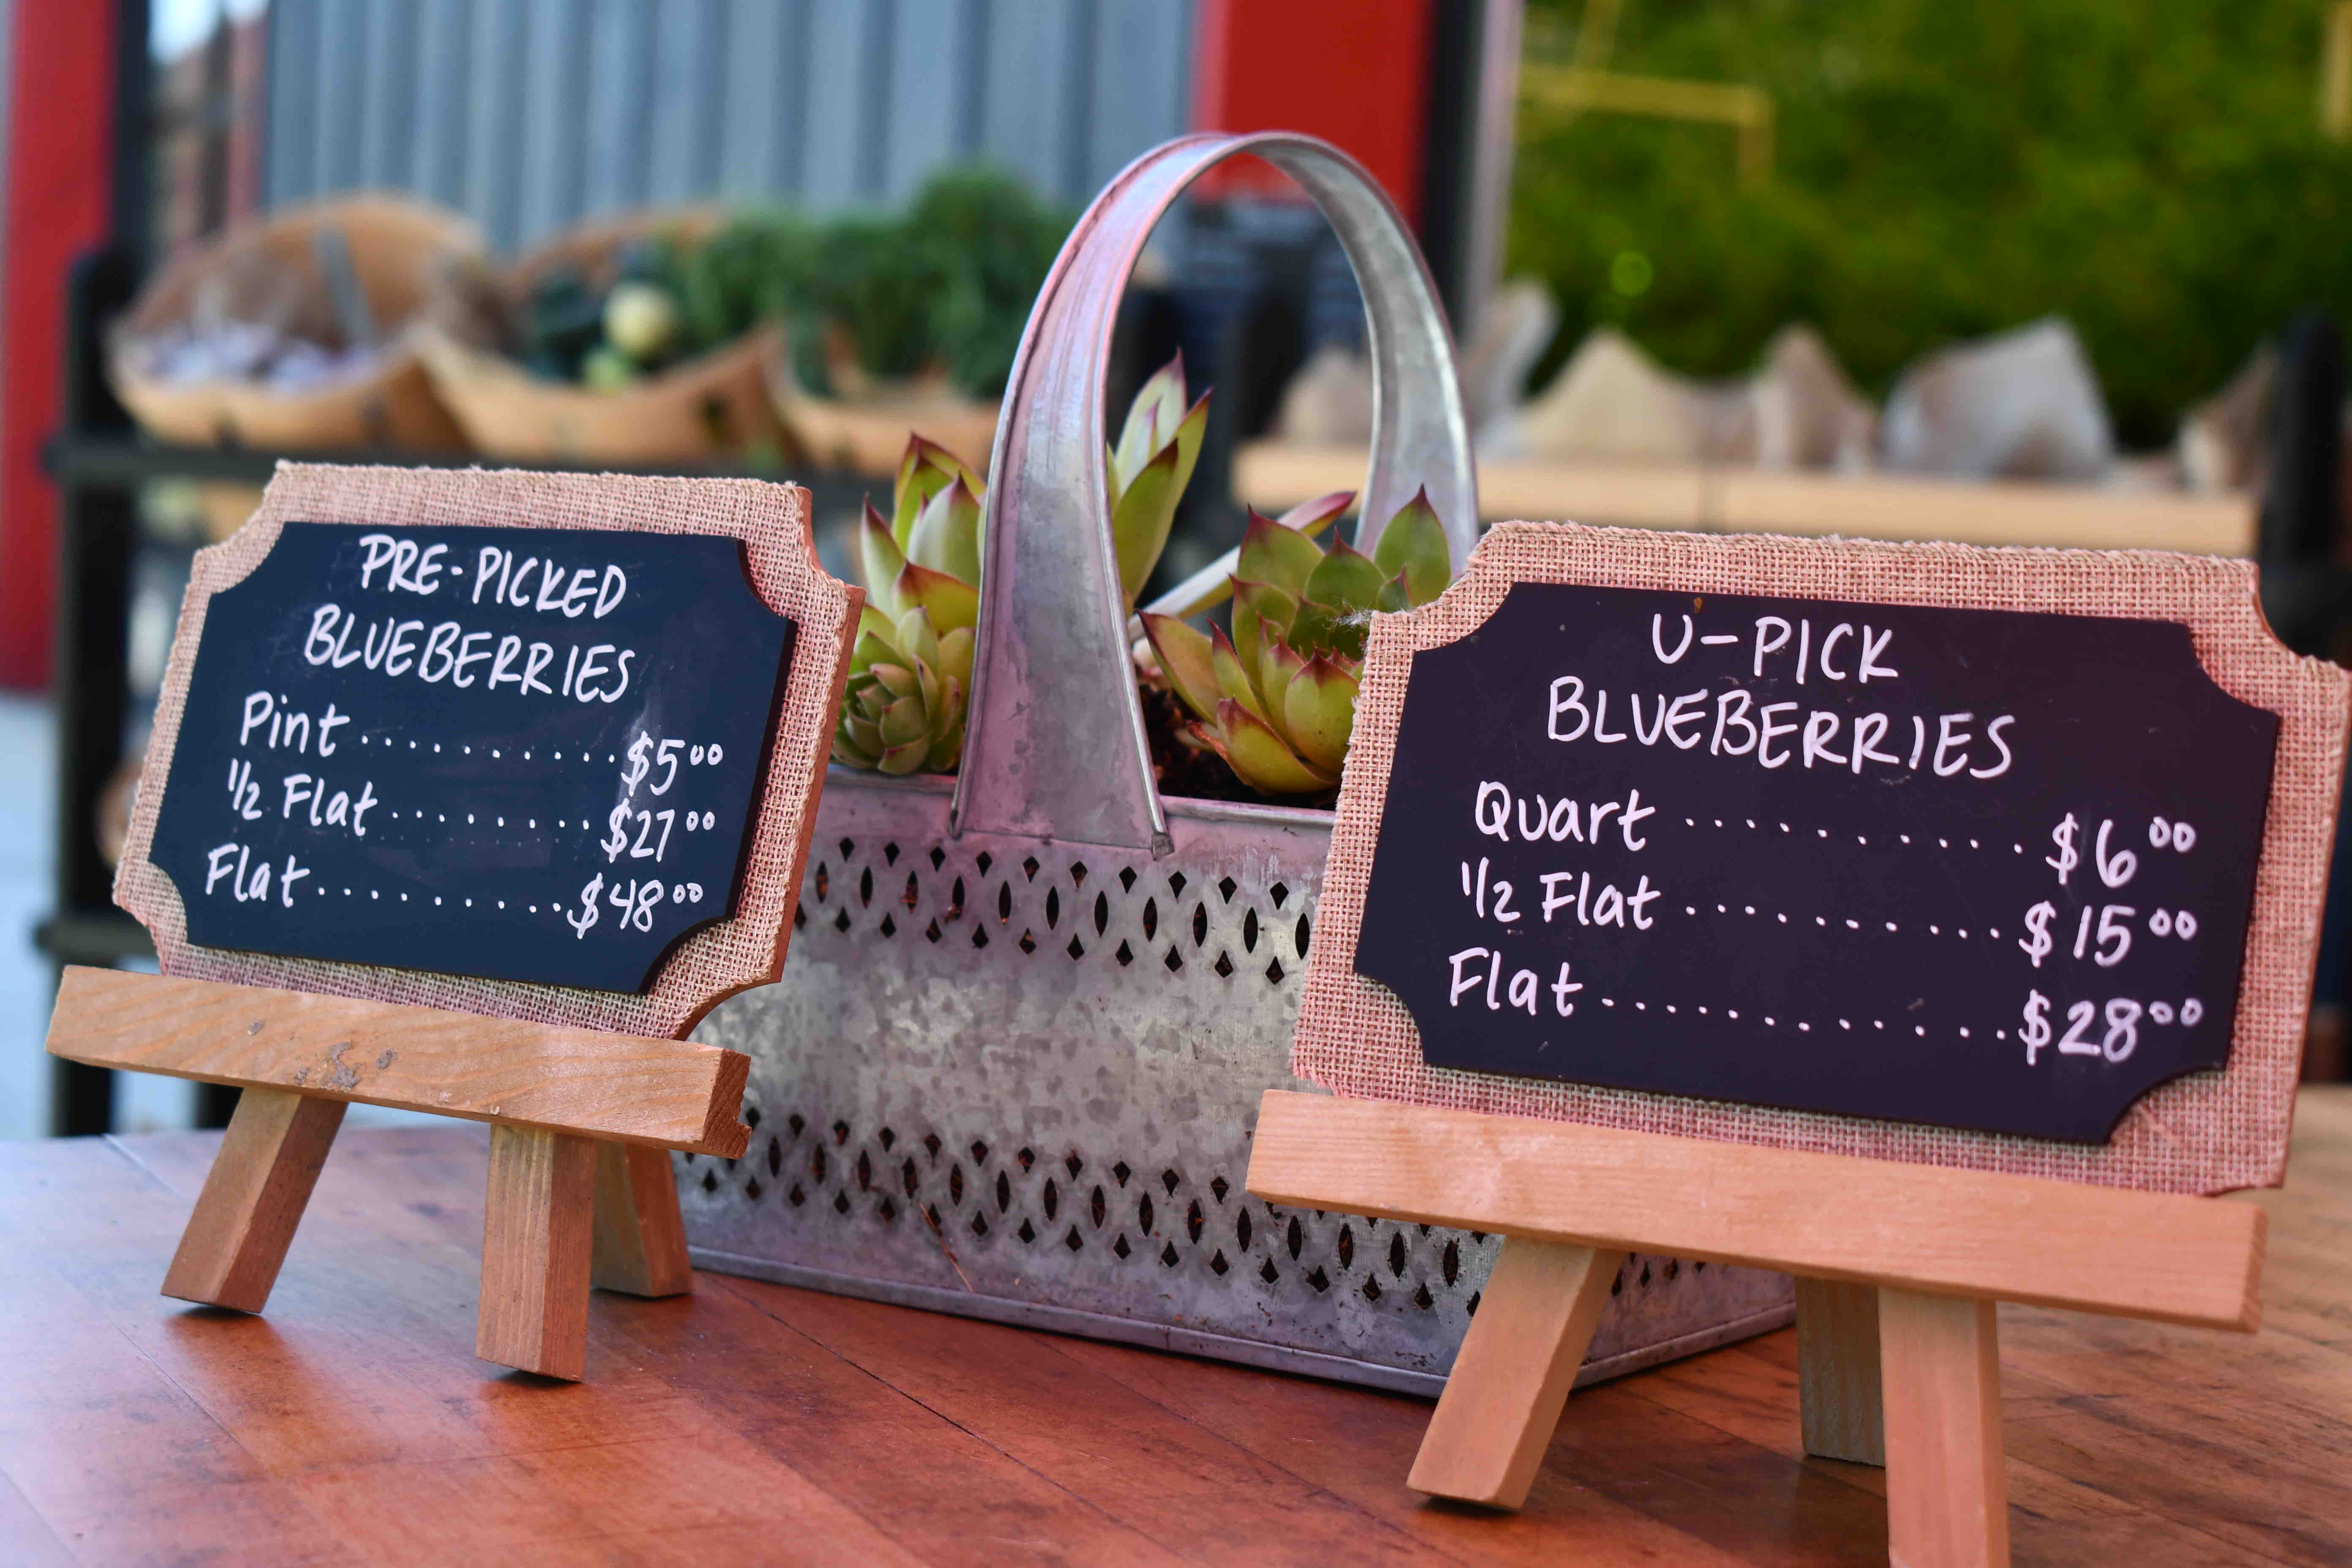 Public Coast Farms offers pre-picked or u-pick blueberries. (image courtesy of Public Coast Brewing)